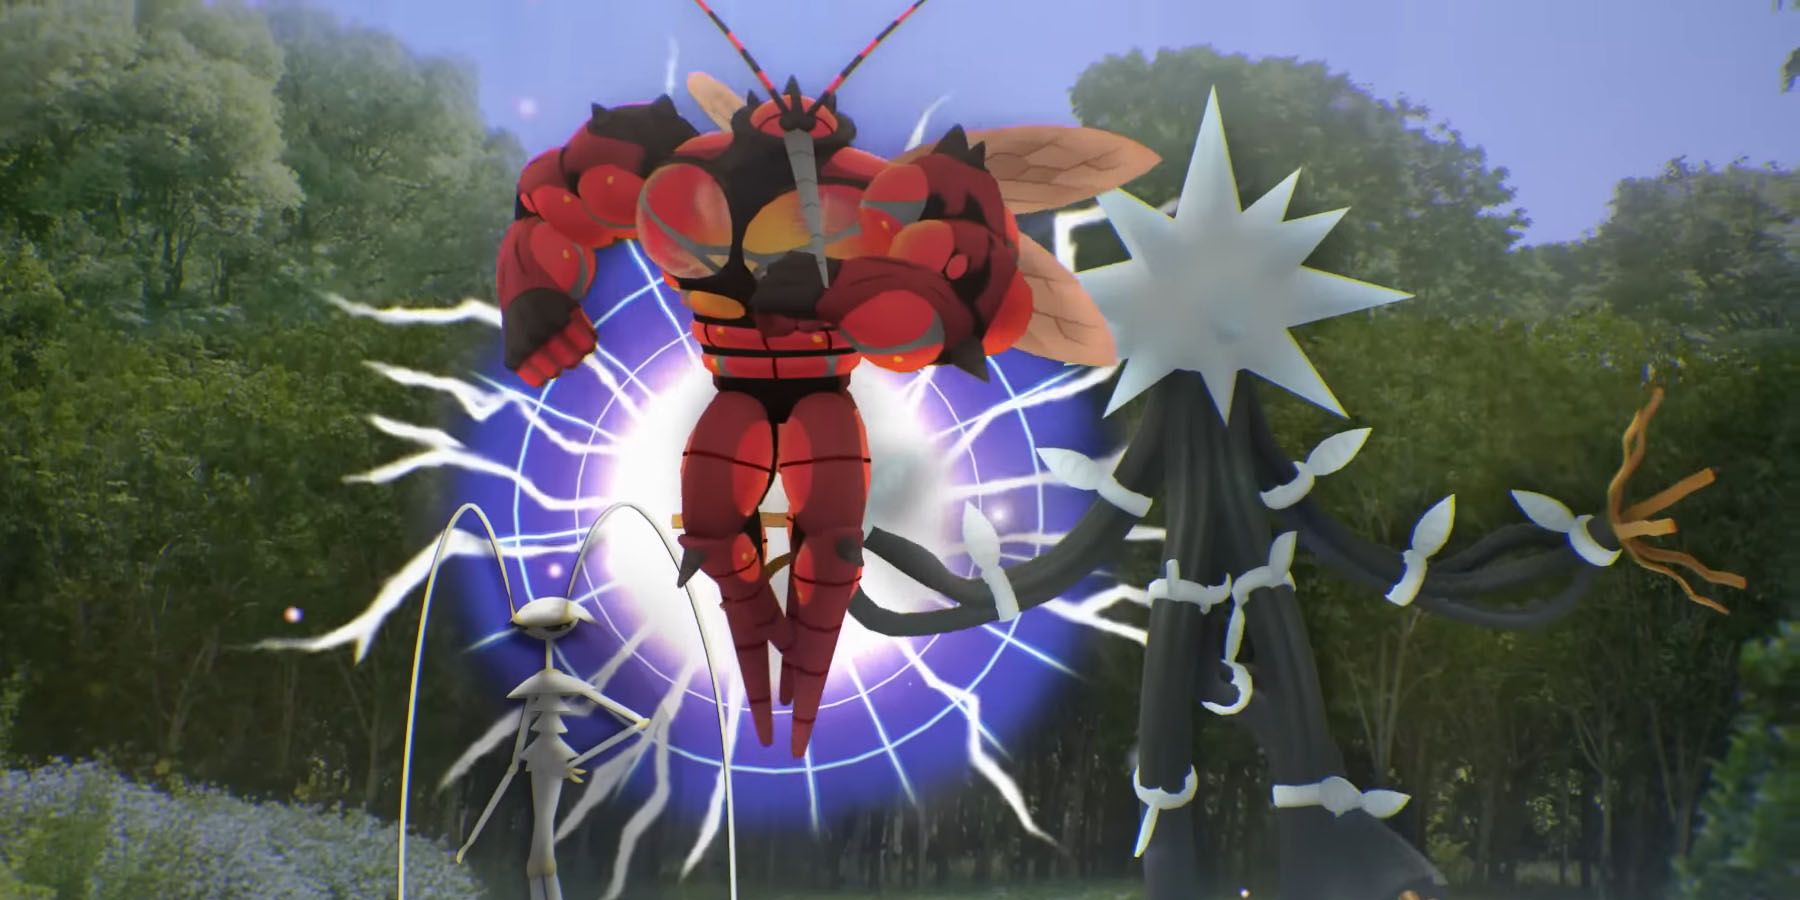 Pokemon Go Is Adding Three More Ultra Beasts Soon - CNET